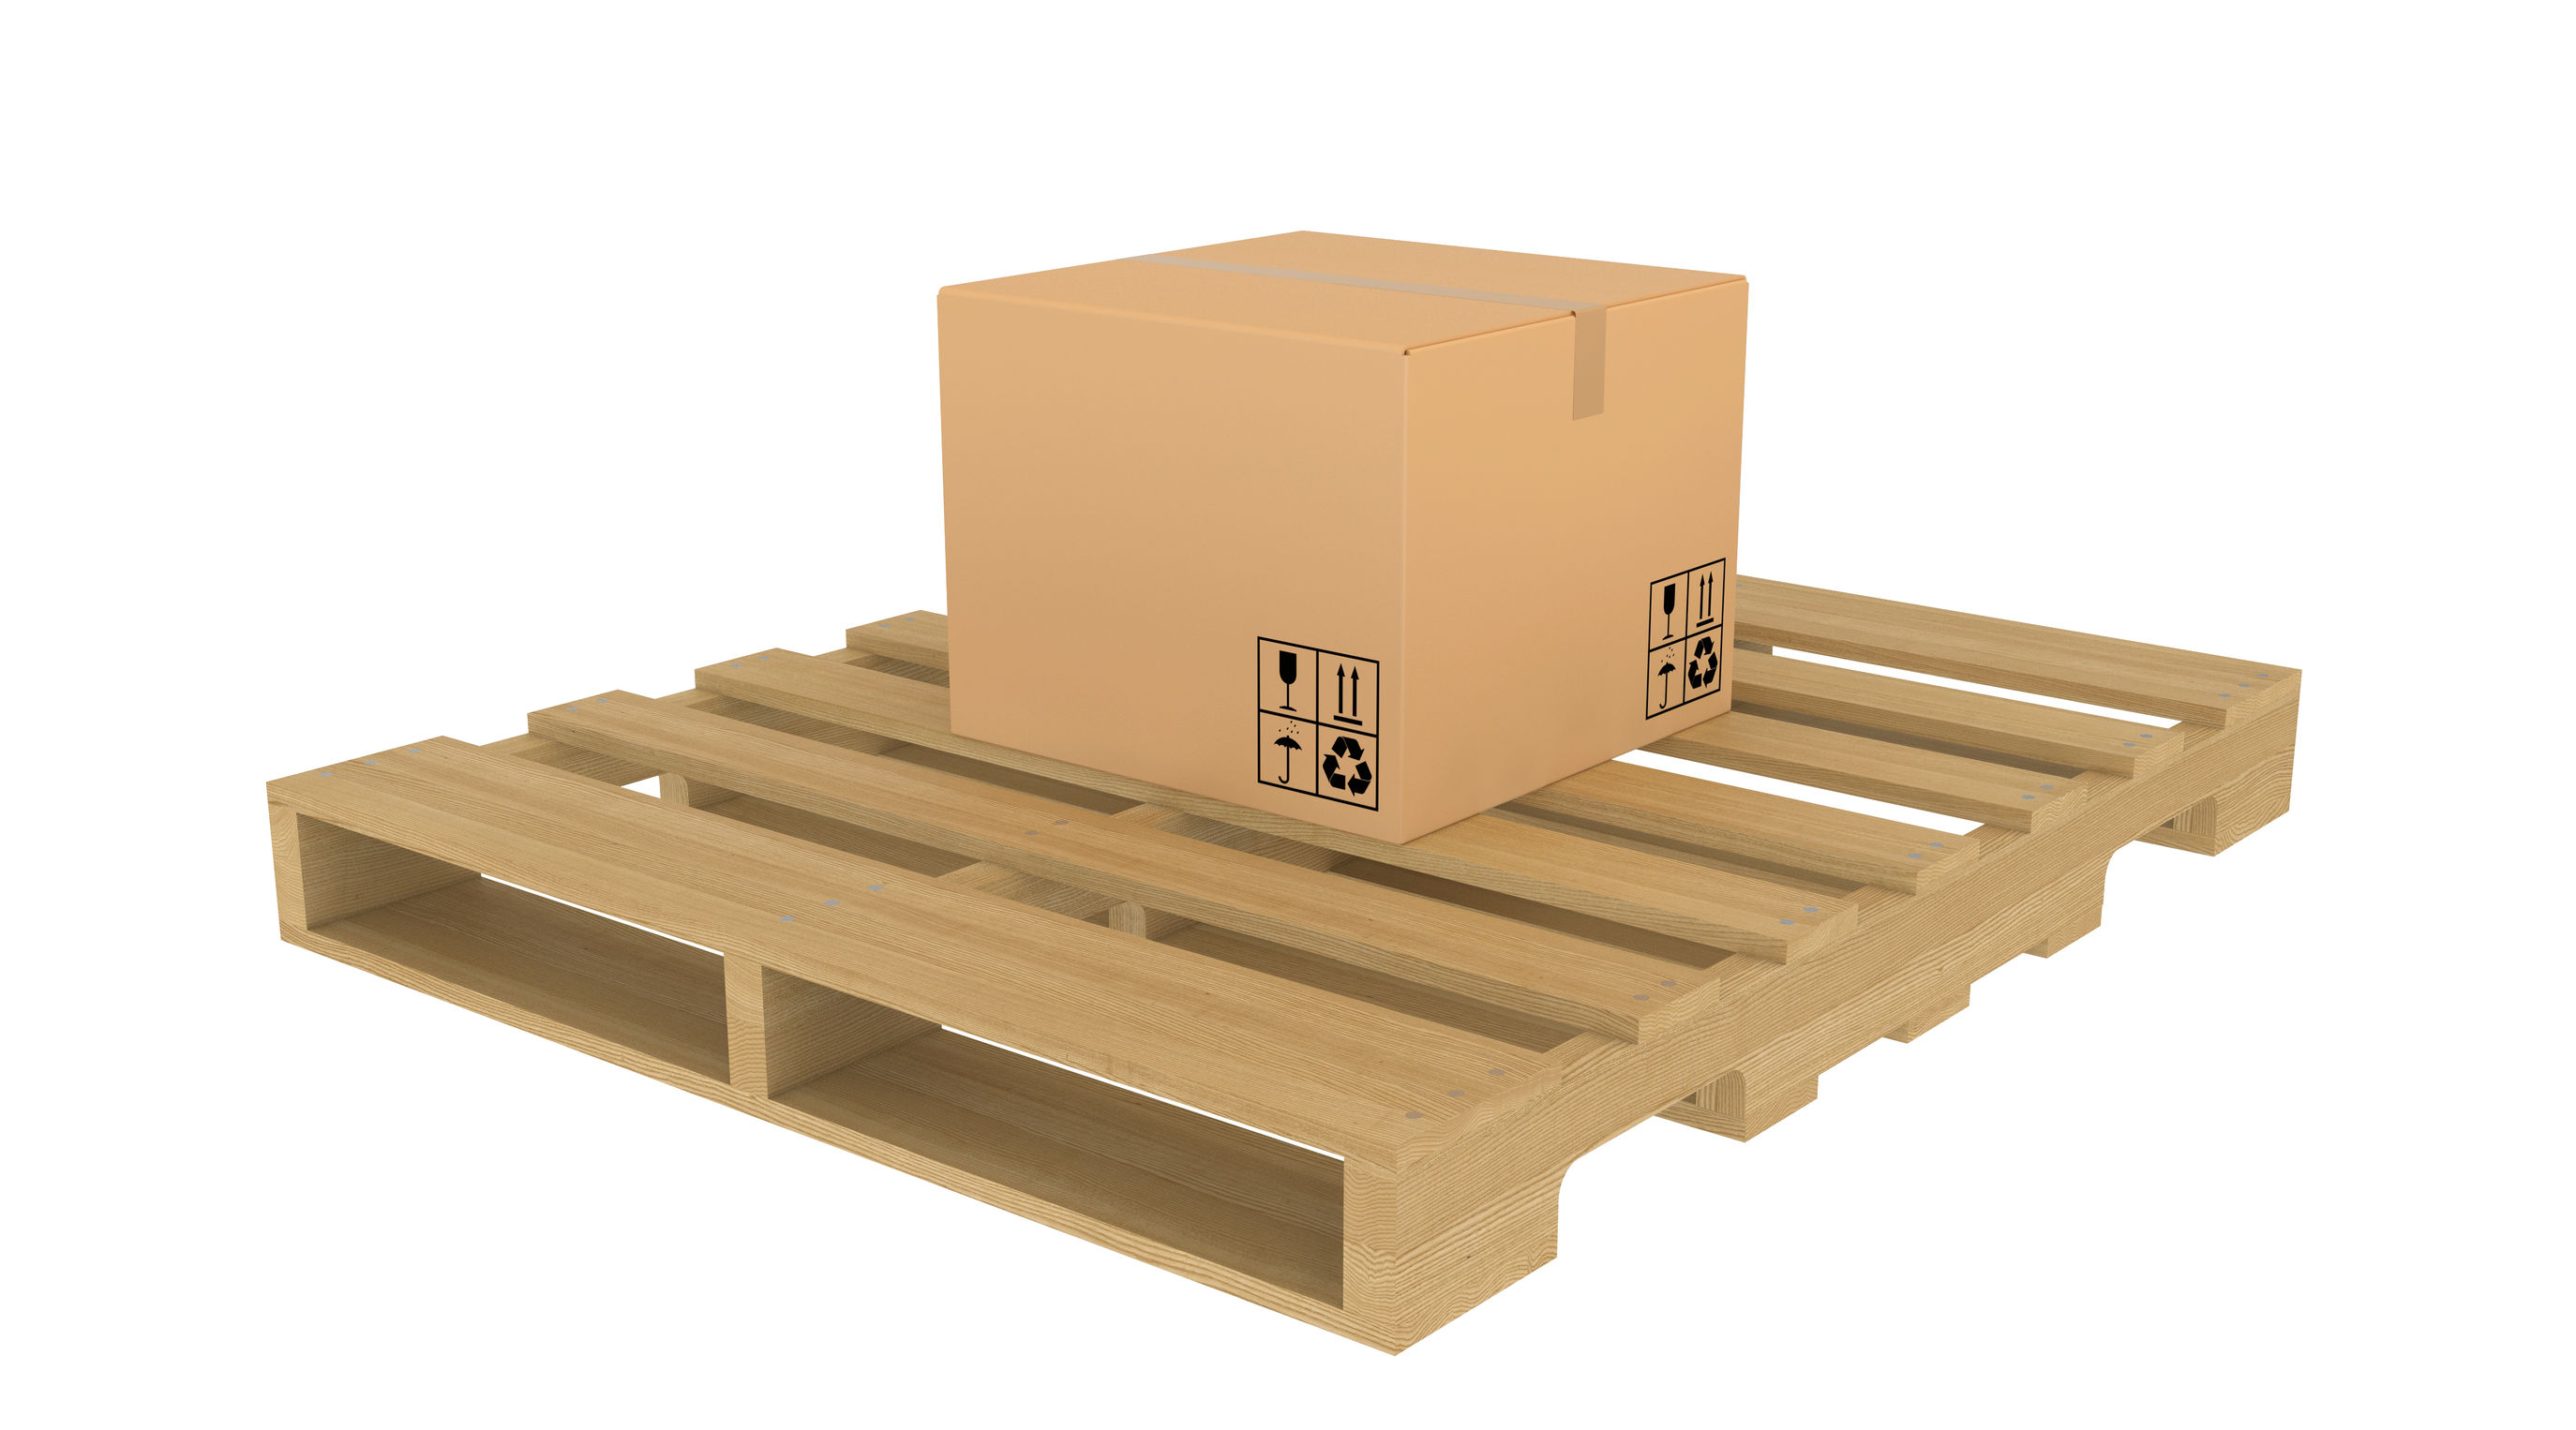 Shipping crates, the first line of defense